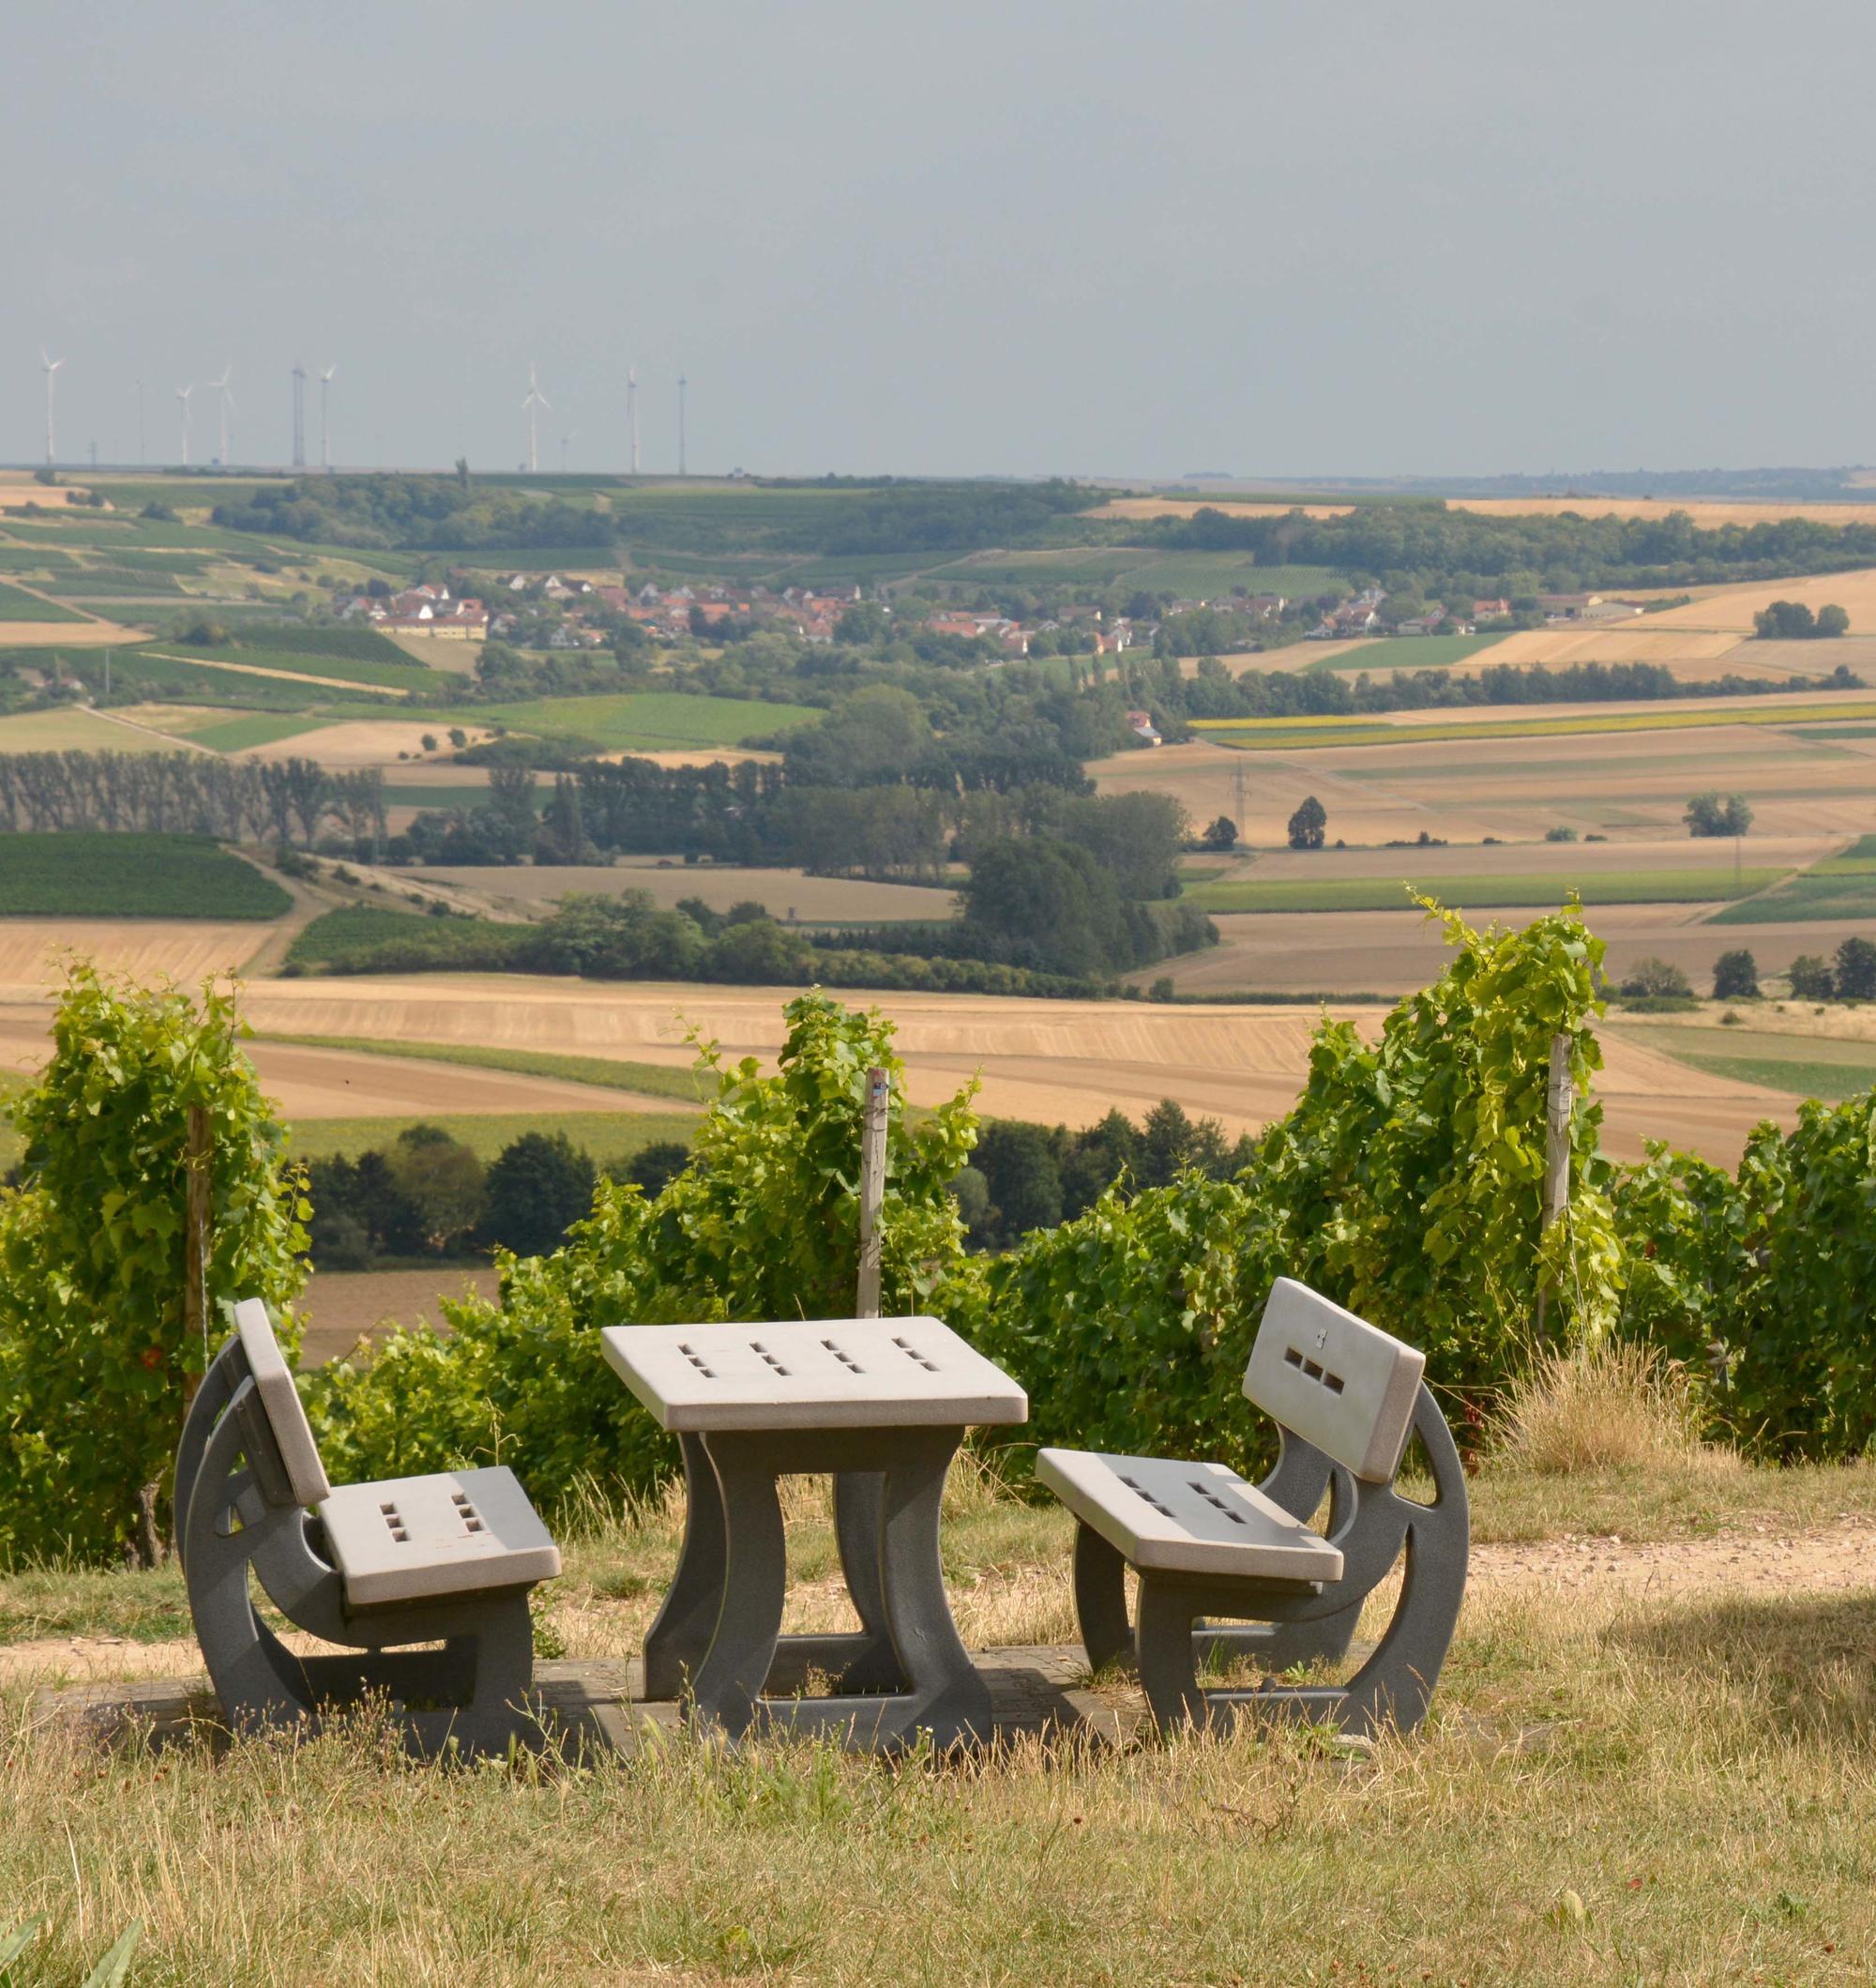 picnic table and benches in countryside